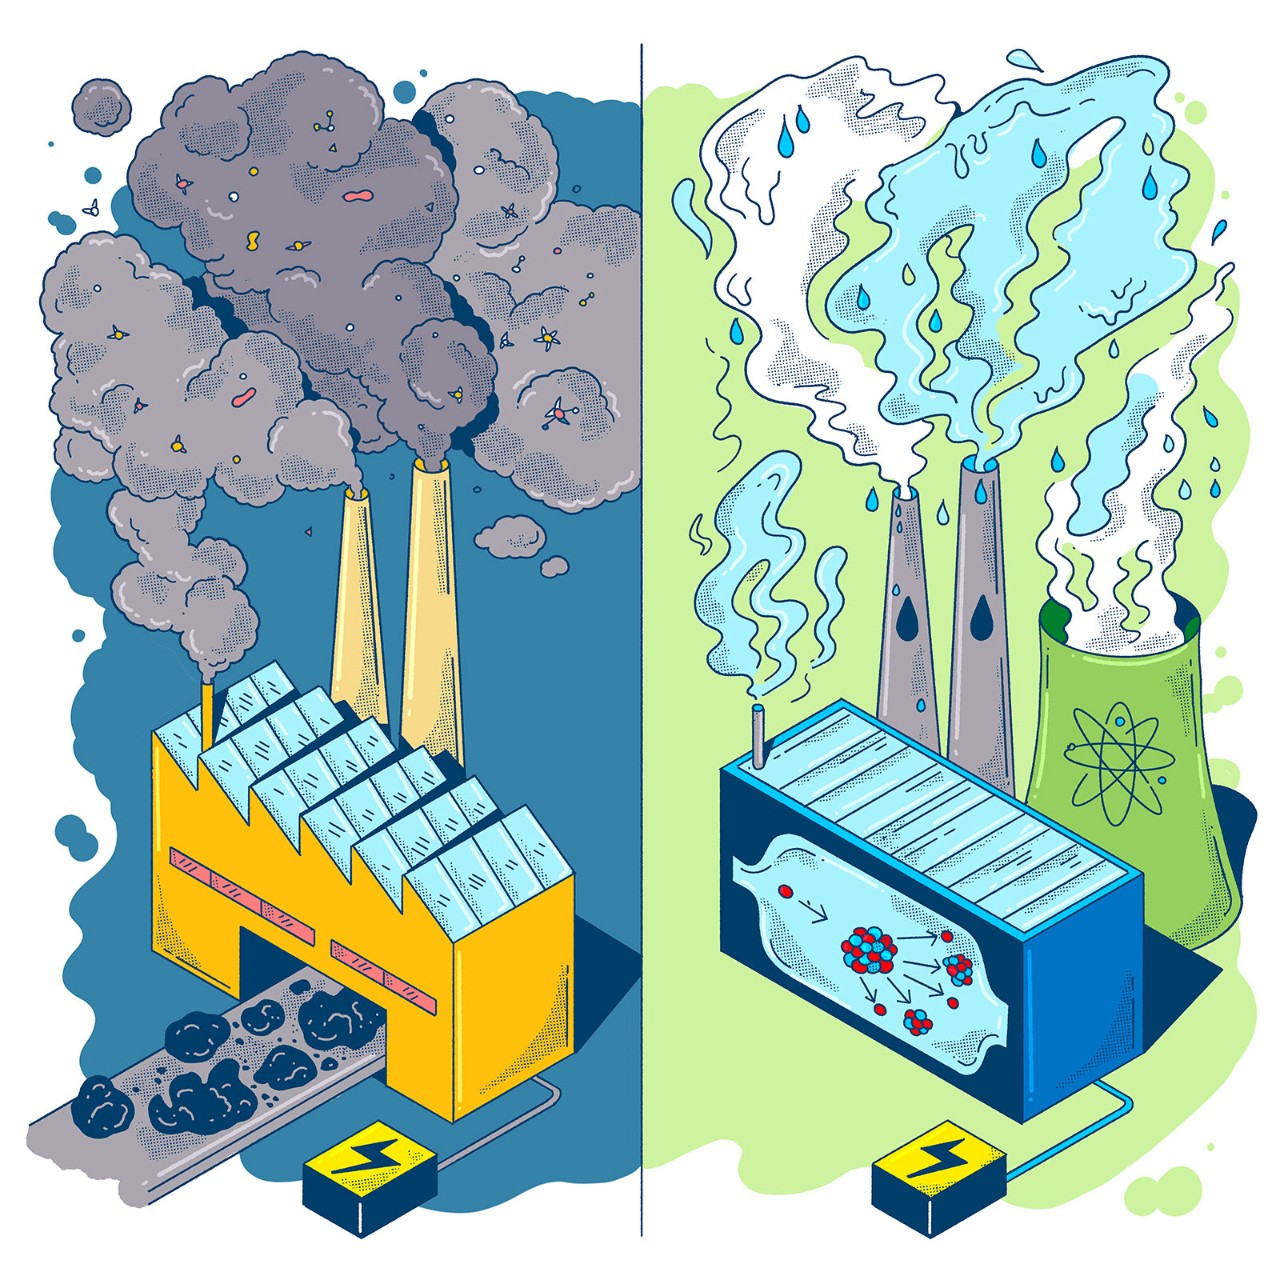 Fossil fuels vs nuclear energy illustration